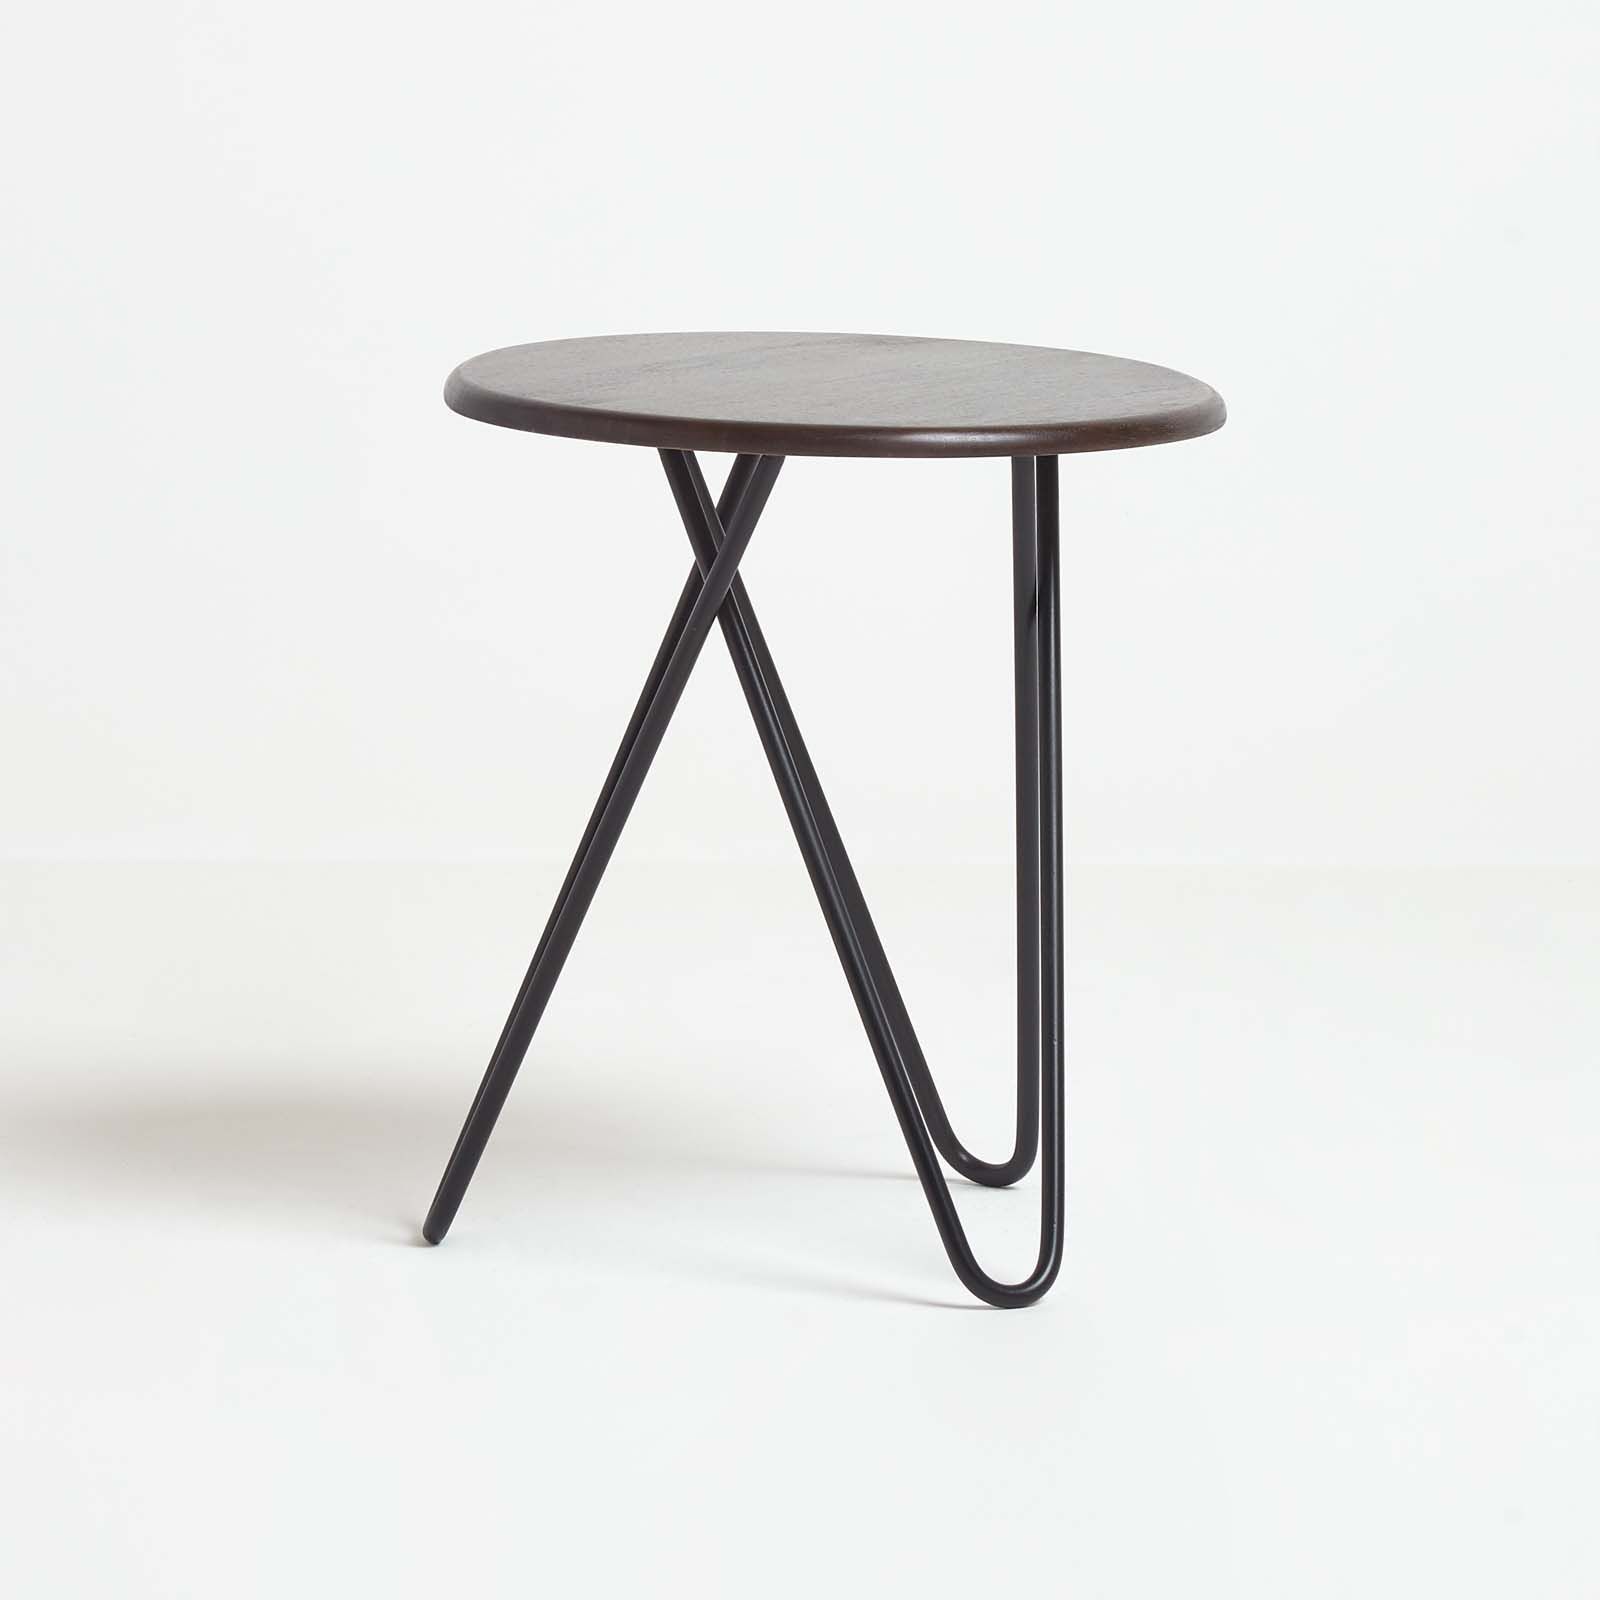 Widely Used Coffee Tables With Tripod Legs With Regard To Soho Hairpin Leg Side Table, Dark (View 3 of 20)